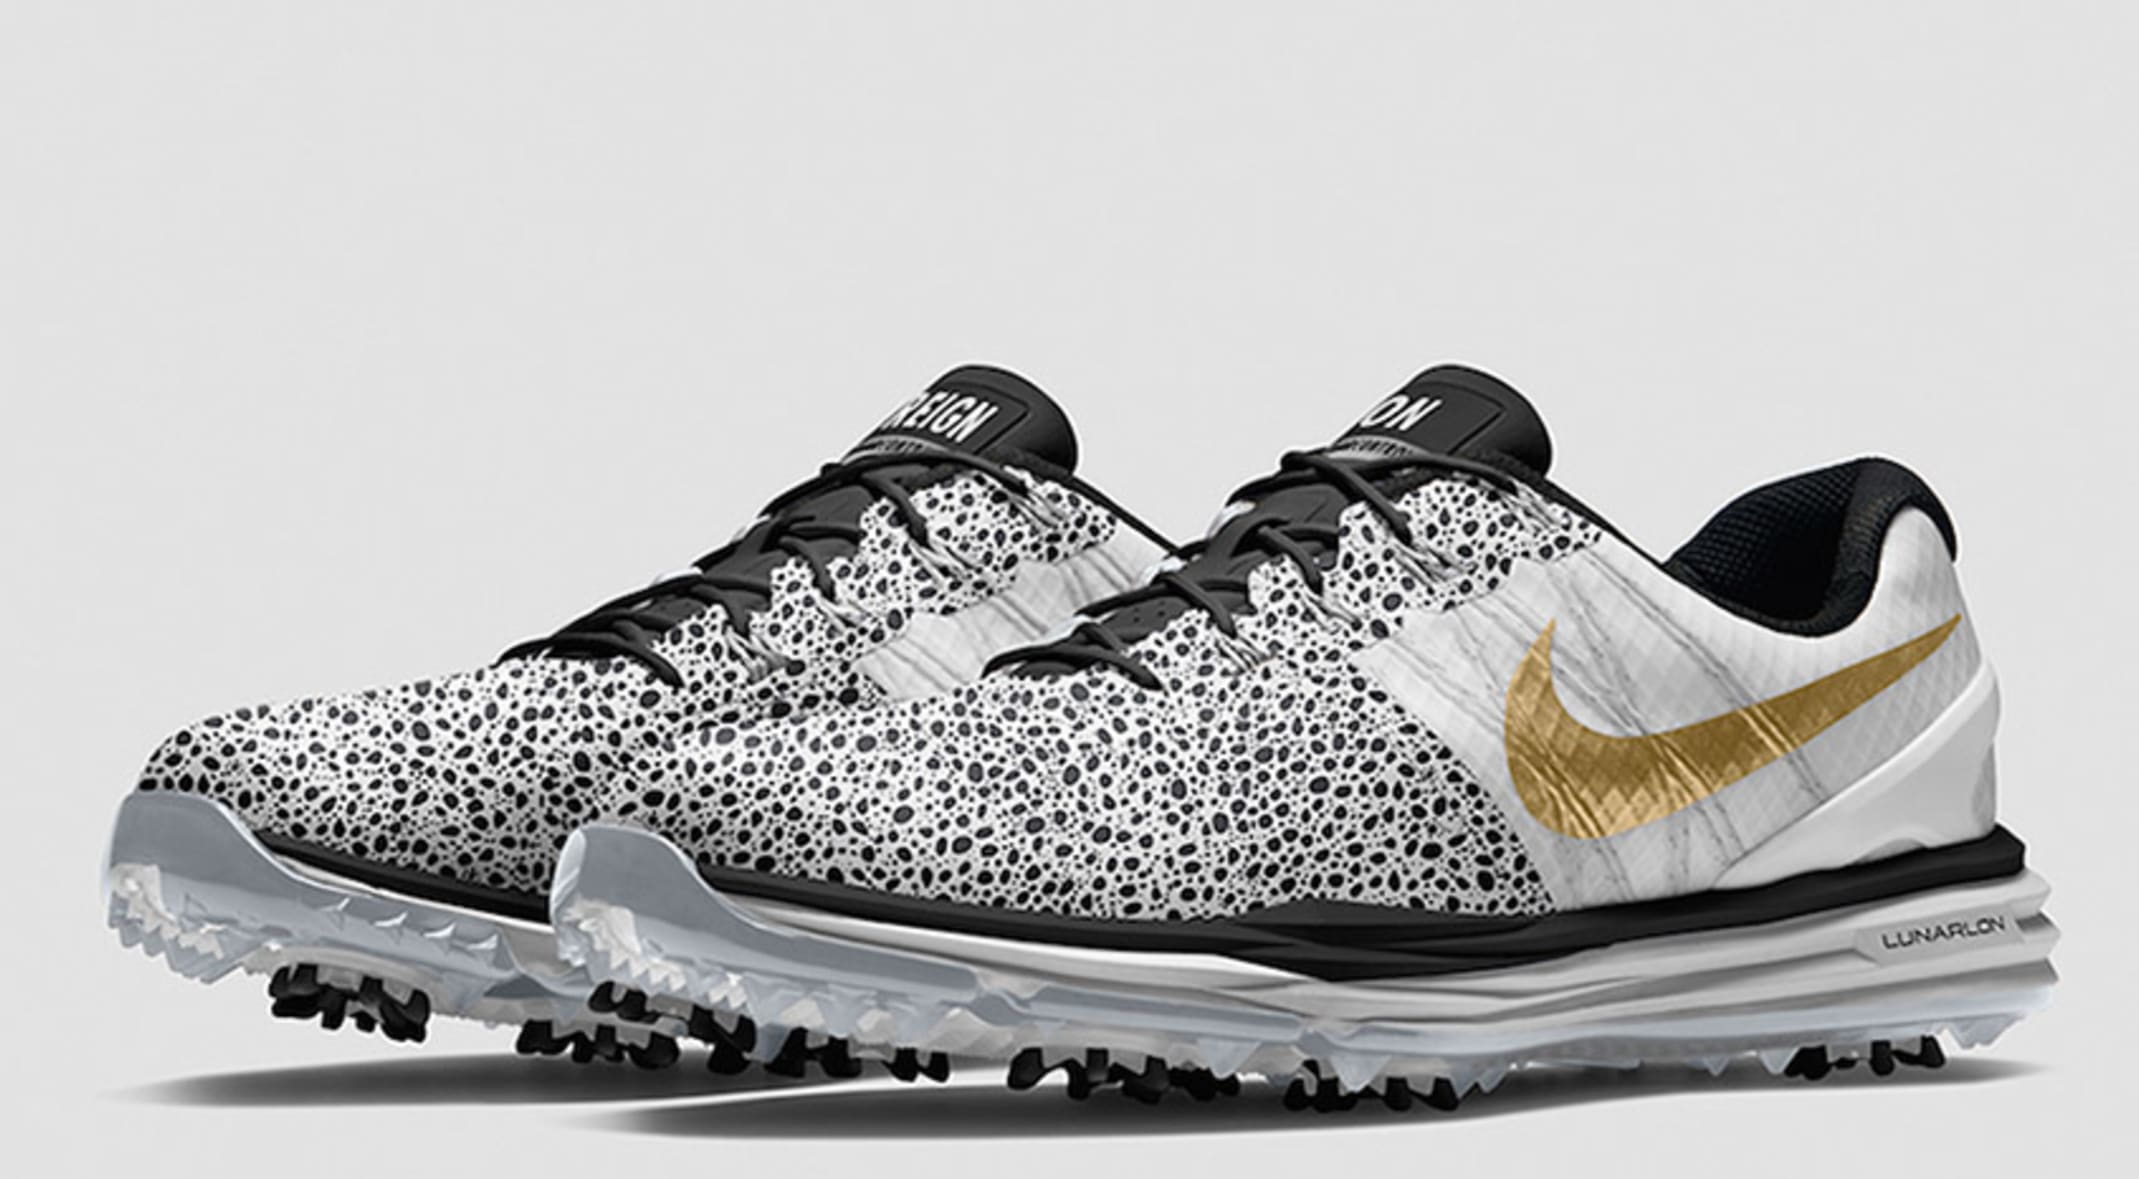 Rory to wear custom Nike shoes at PGA